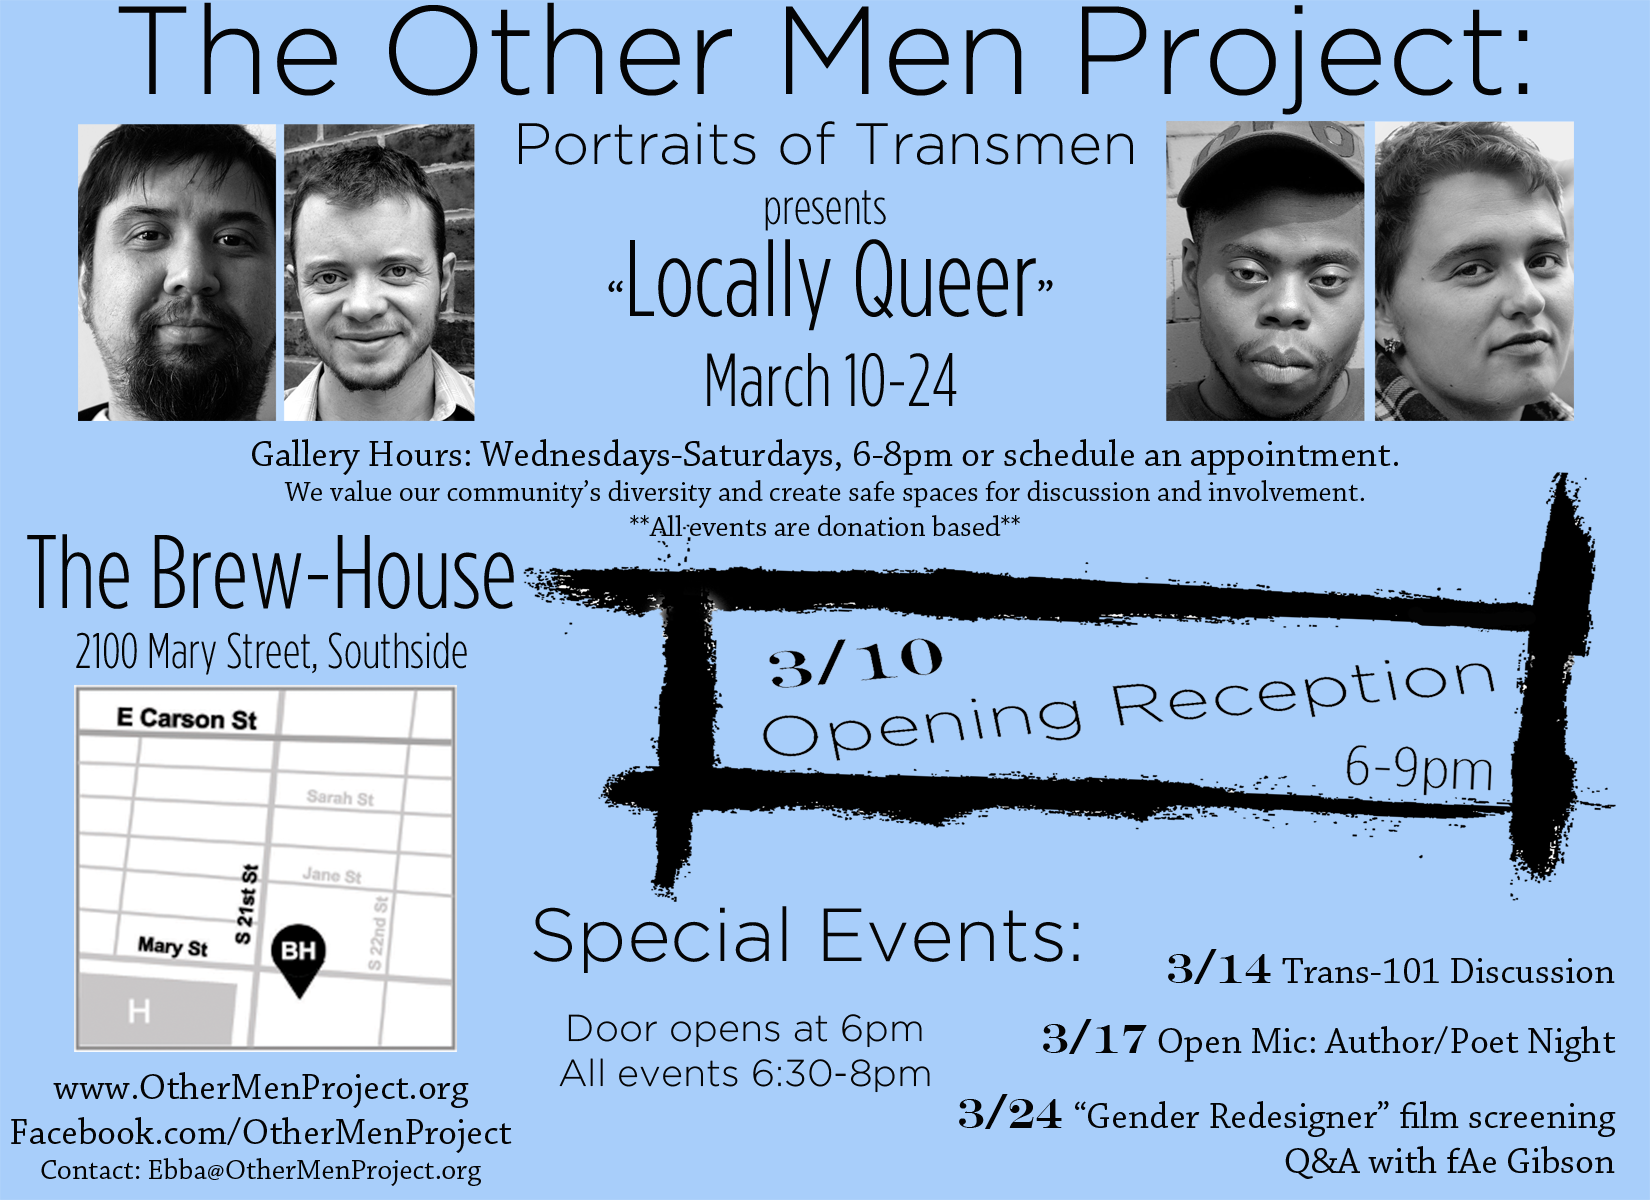 The Other Men Project: Portraits of Transmen presents “Locally Queer”